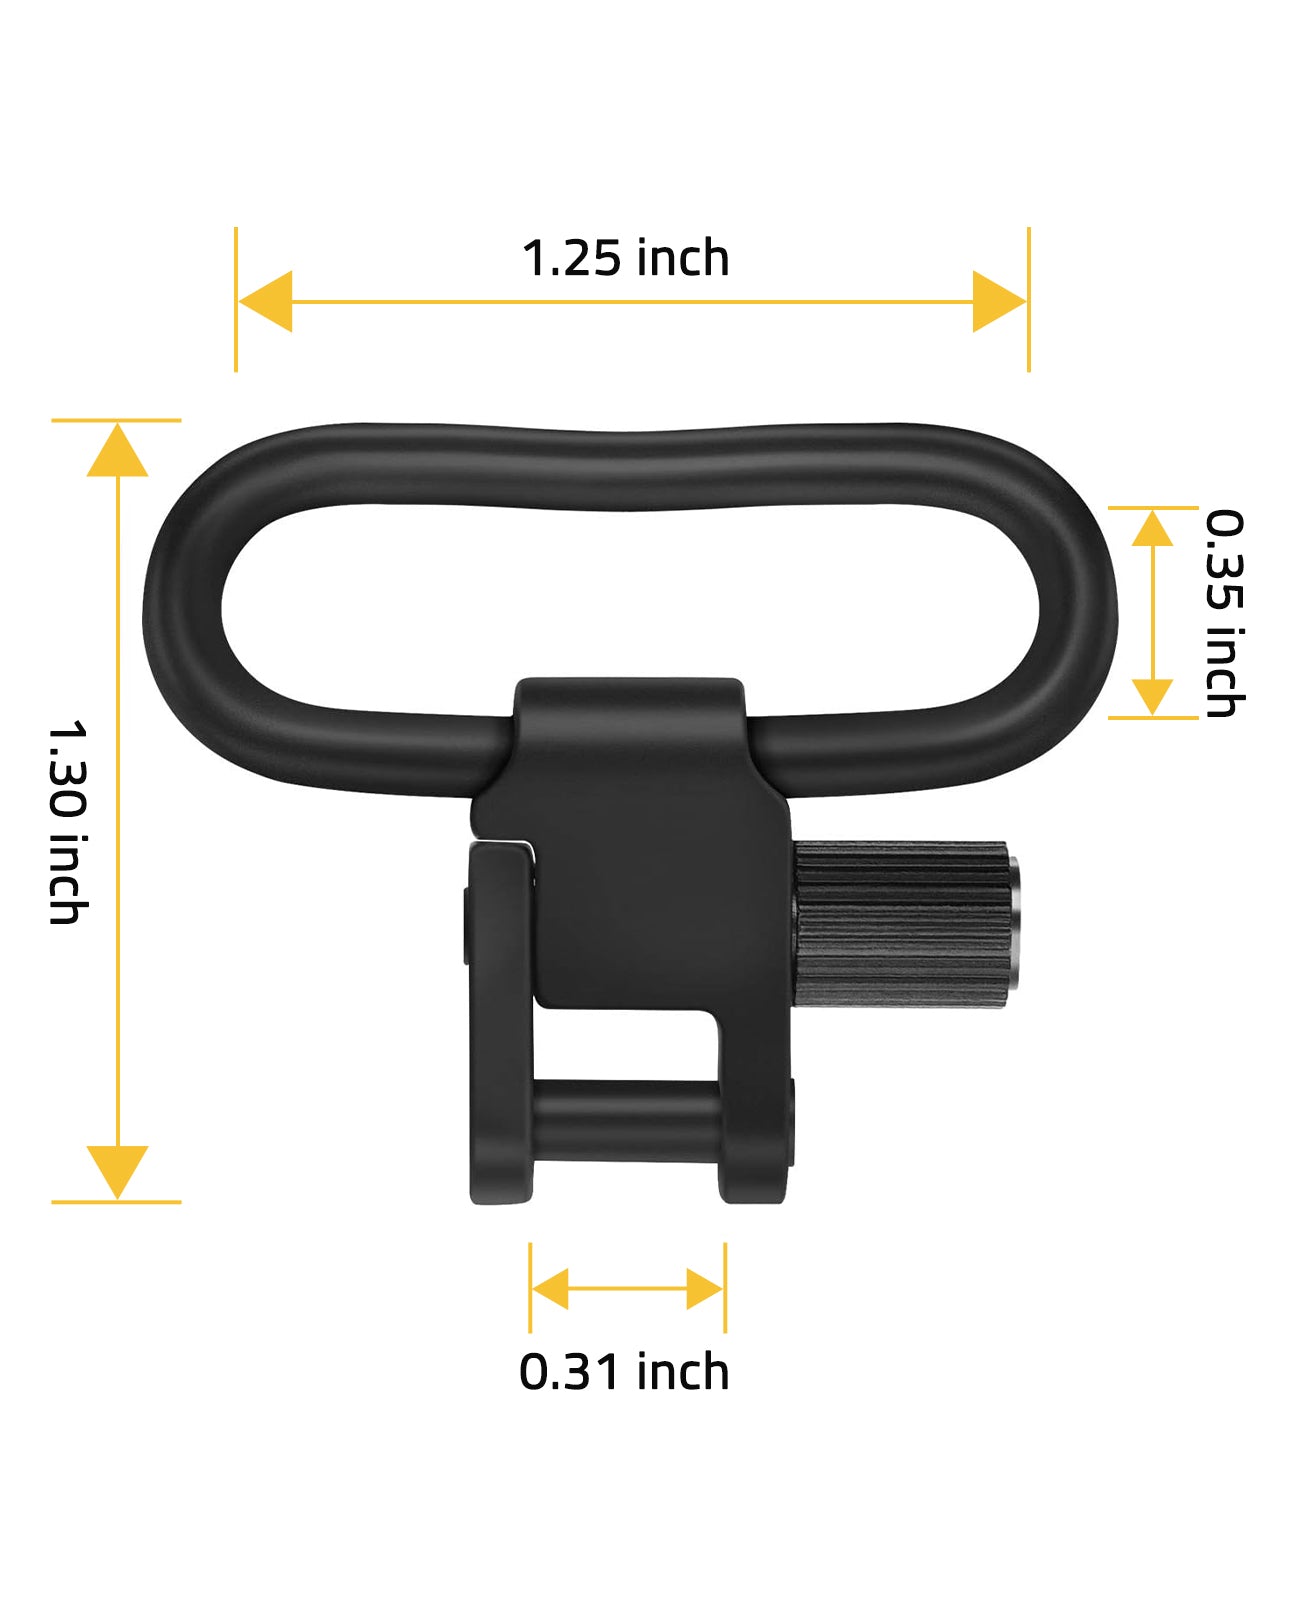 1.25 inches QD sling swivel size details